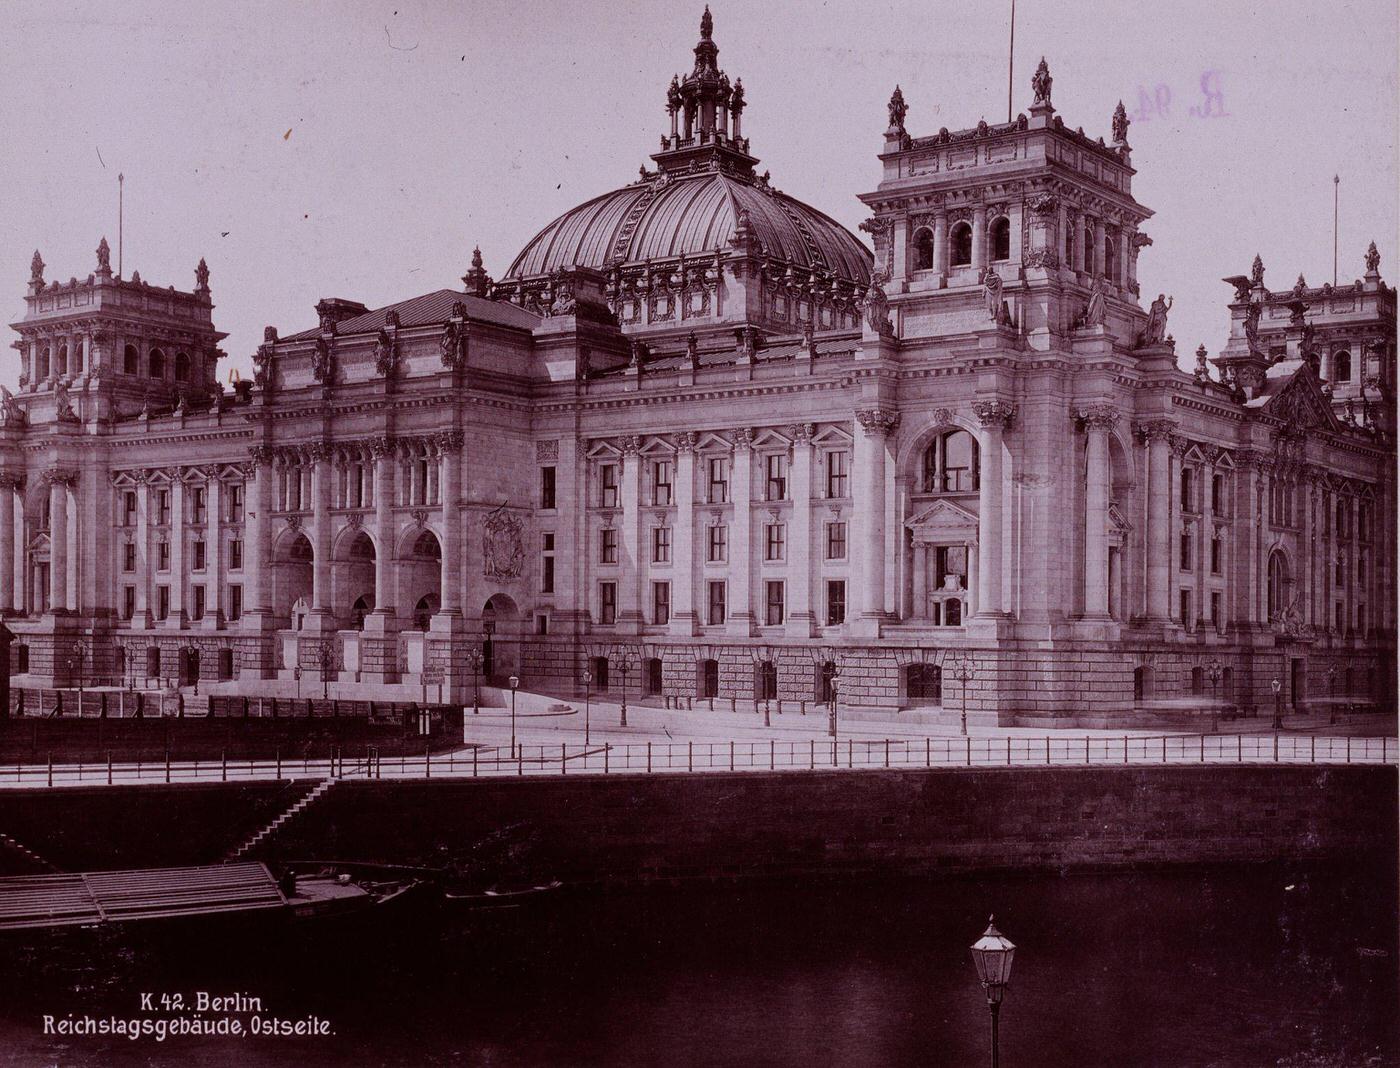 Government building, Berlin, 1890.